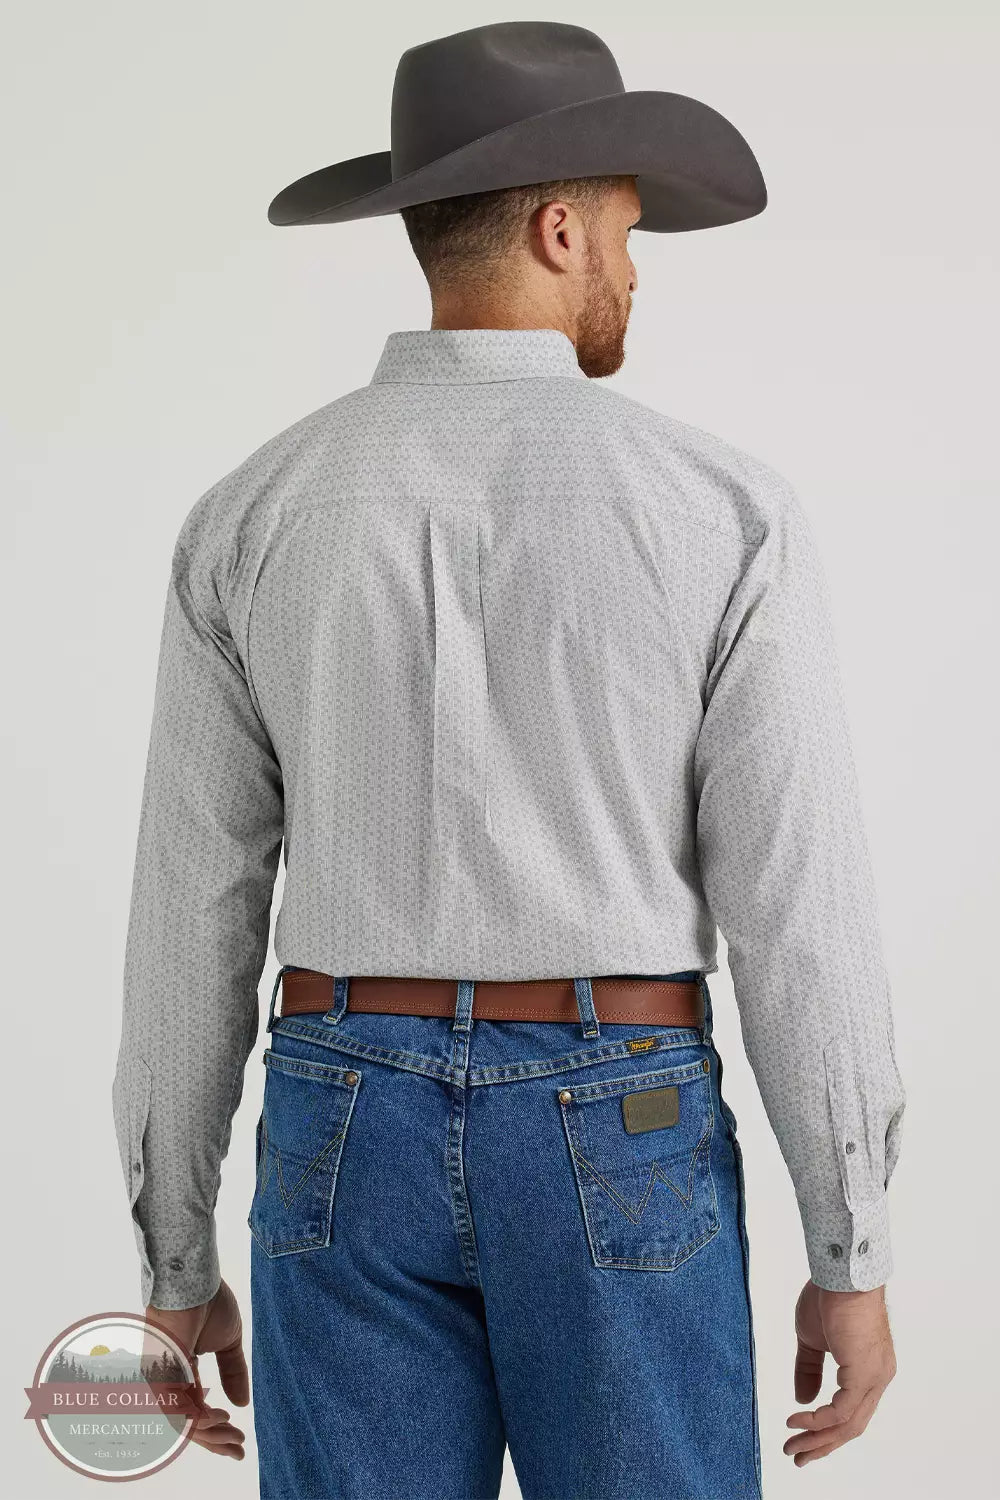 Wrangler 112344887 George Strait Long Sleeve Button Down Shirt in Grey Hatches Back View